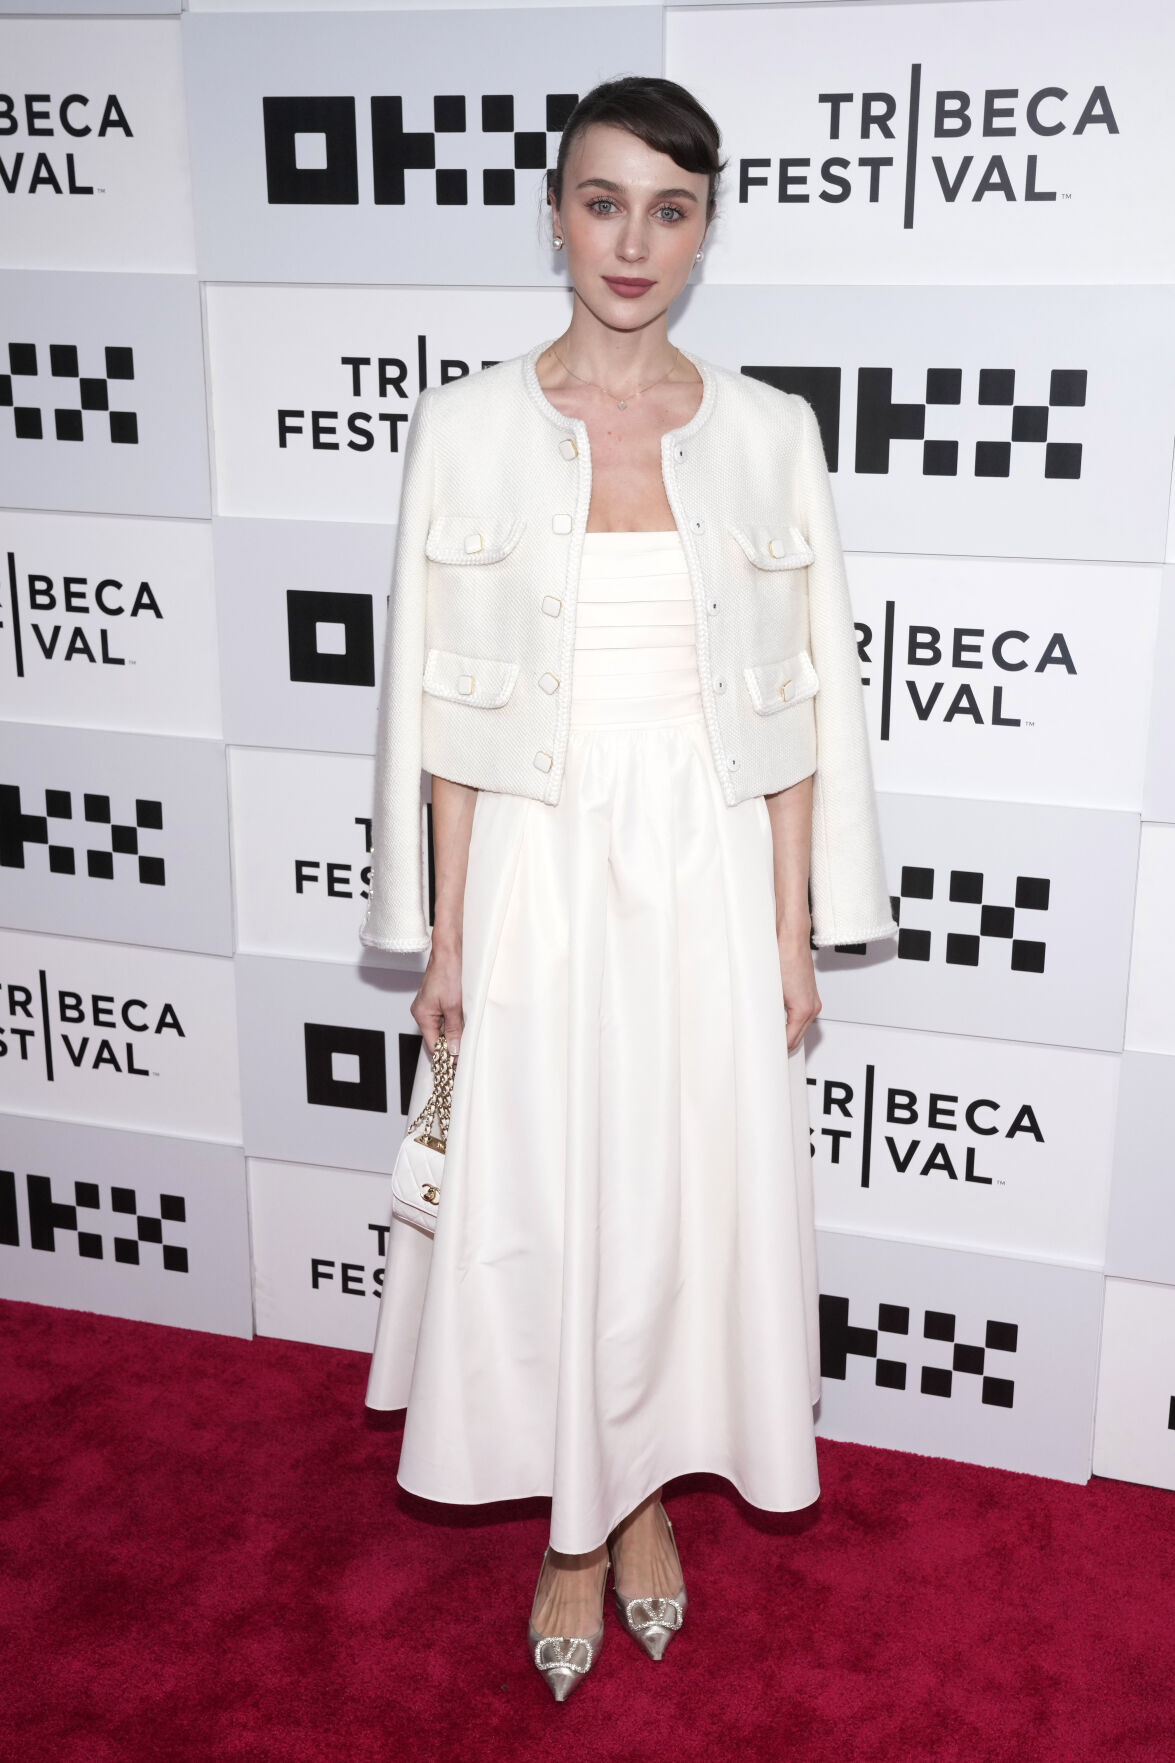 Mary Leest attends the premiere of "The Walking Dead: Dead City" at the BMCC Tribeca Performing Arts Center during the Tribeca Festival on Tuesday, June 13, 2023, in New York.